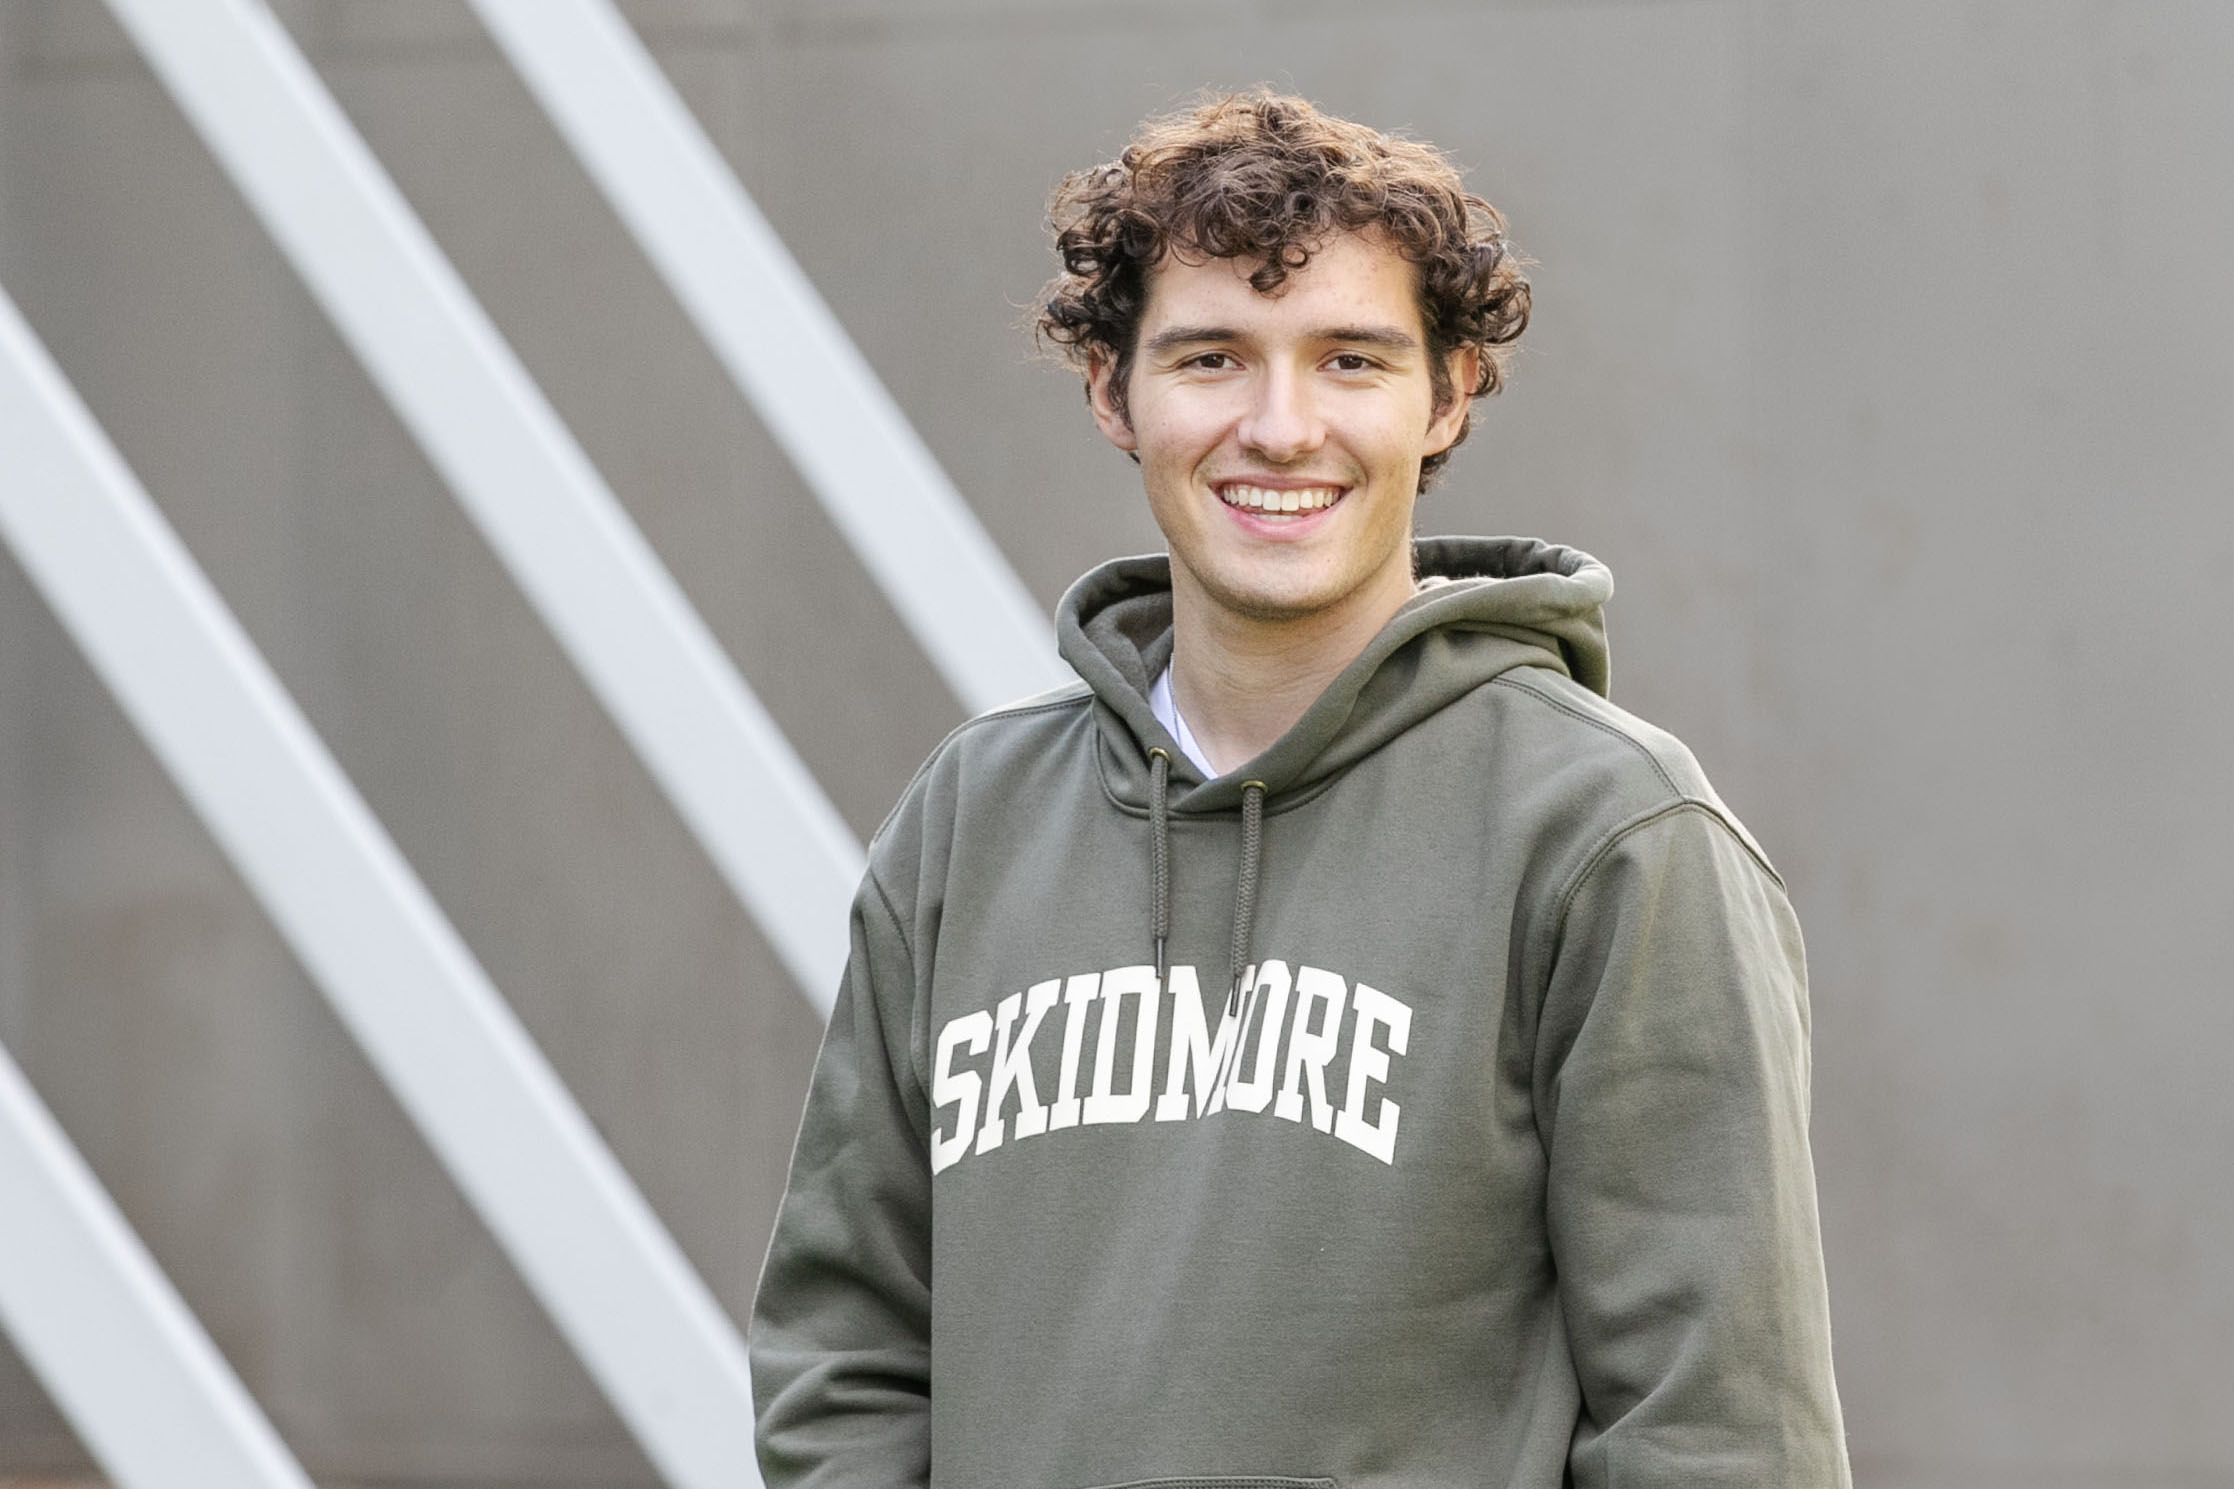 Braedon Quinlan 鈥�24 smiles at the camera while wearing a Skidmore sweatshirt in front of the Tang Teaching Museum.